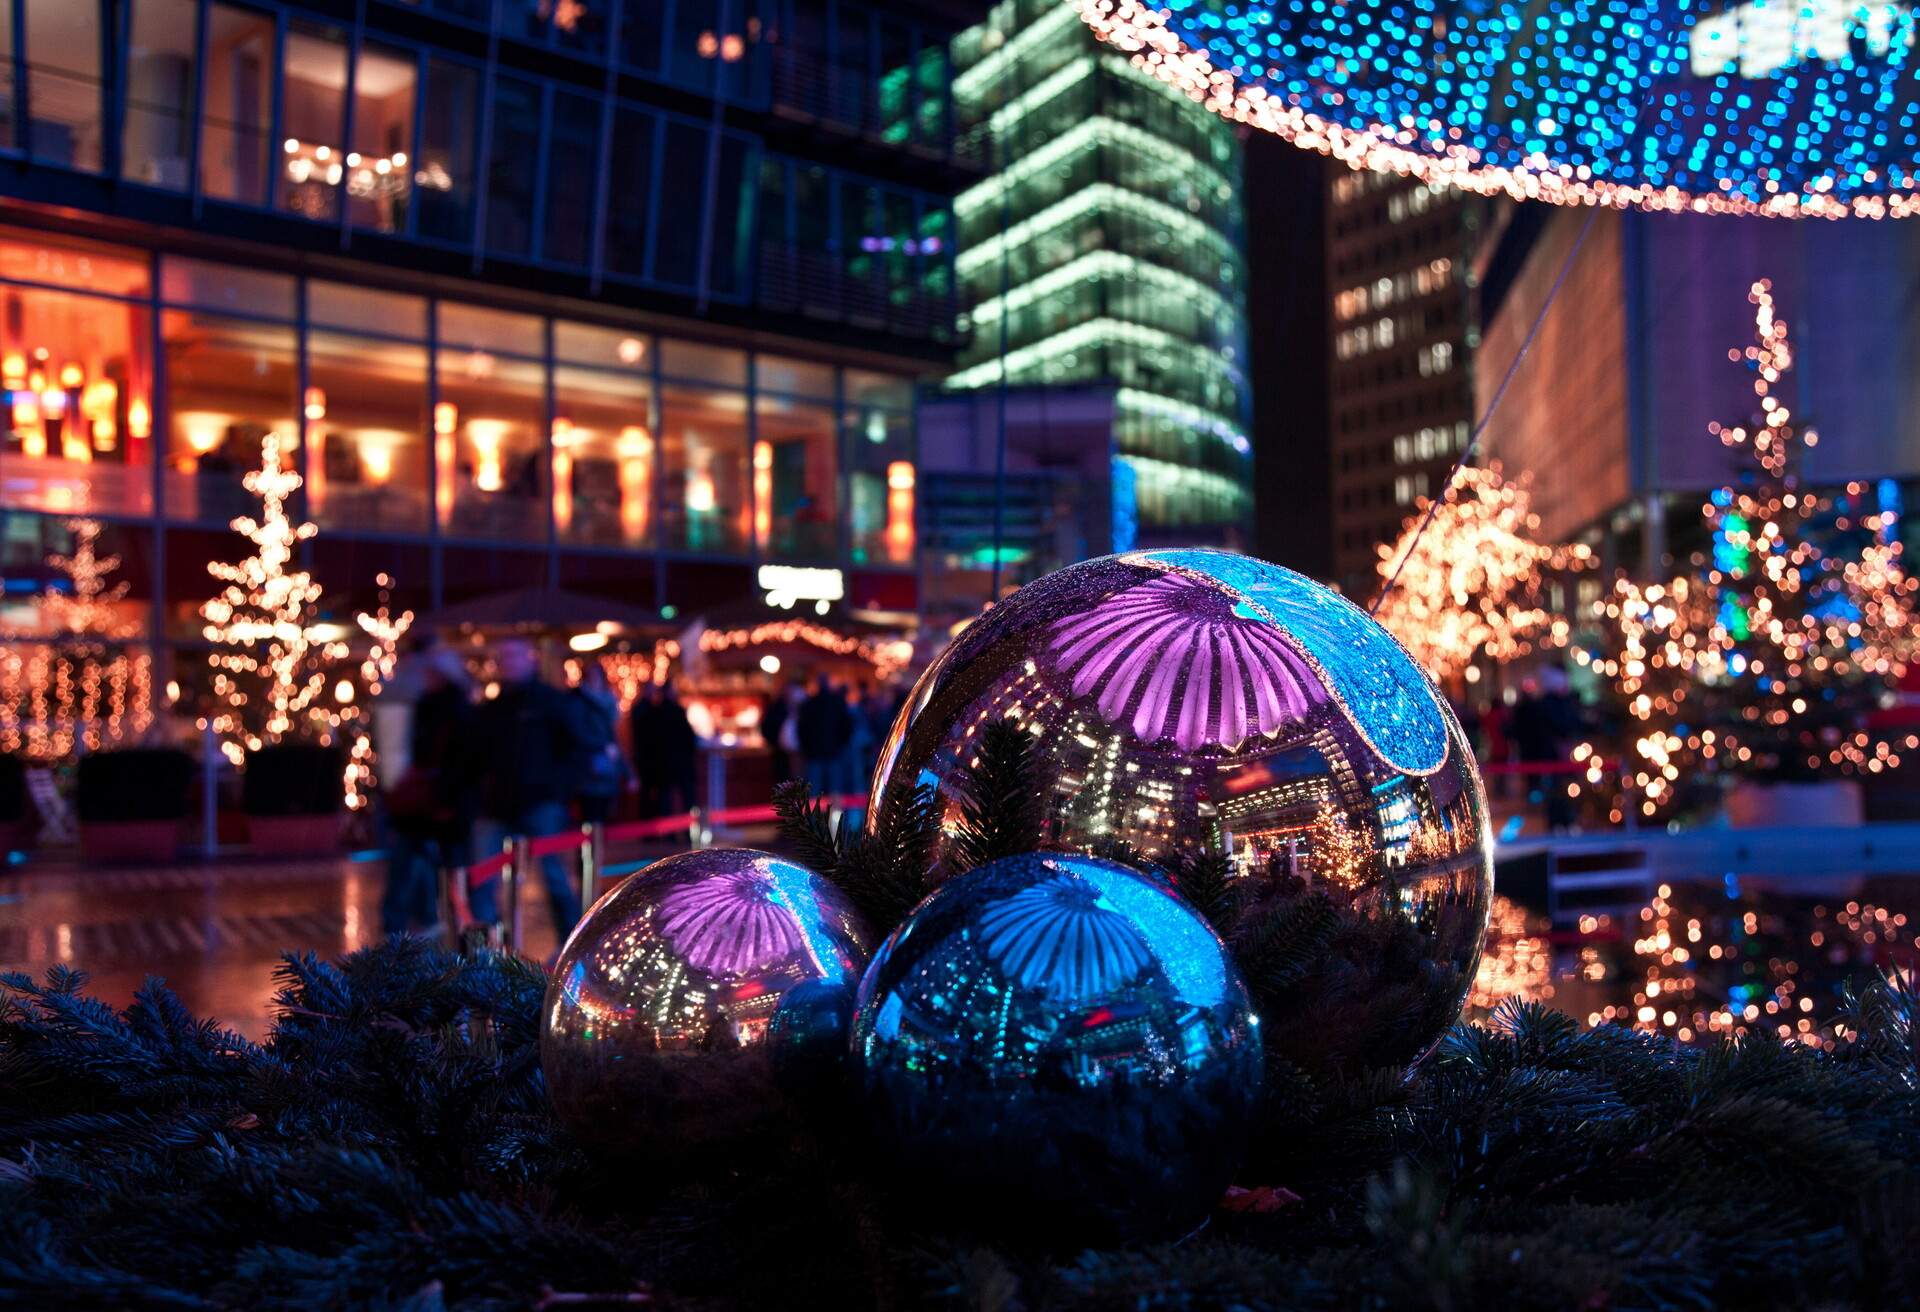 The beautiful night of the christmas market decorated with lights in the Sony Center of Berlin, you can see the whole christmas market in the metal balls.